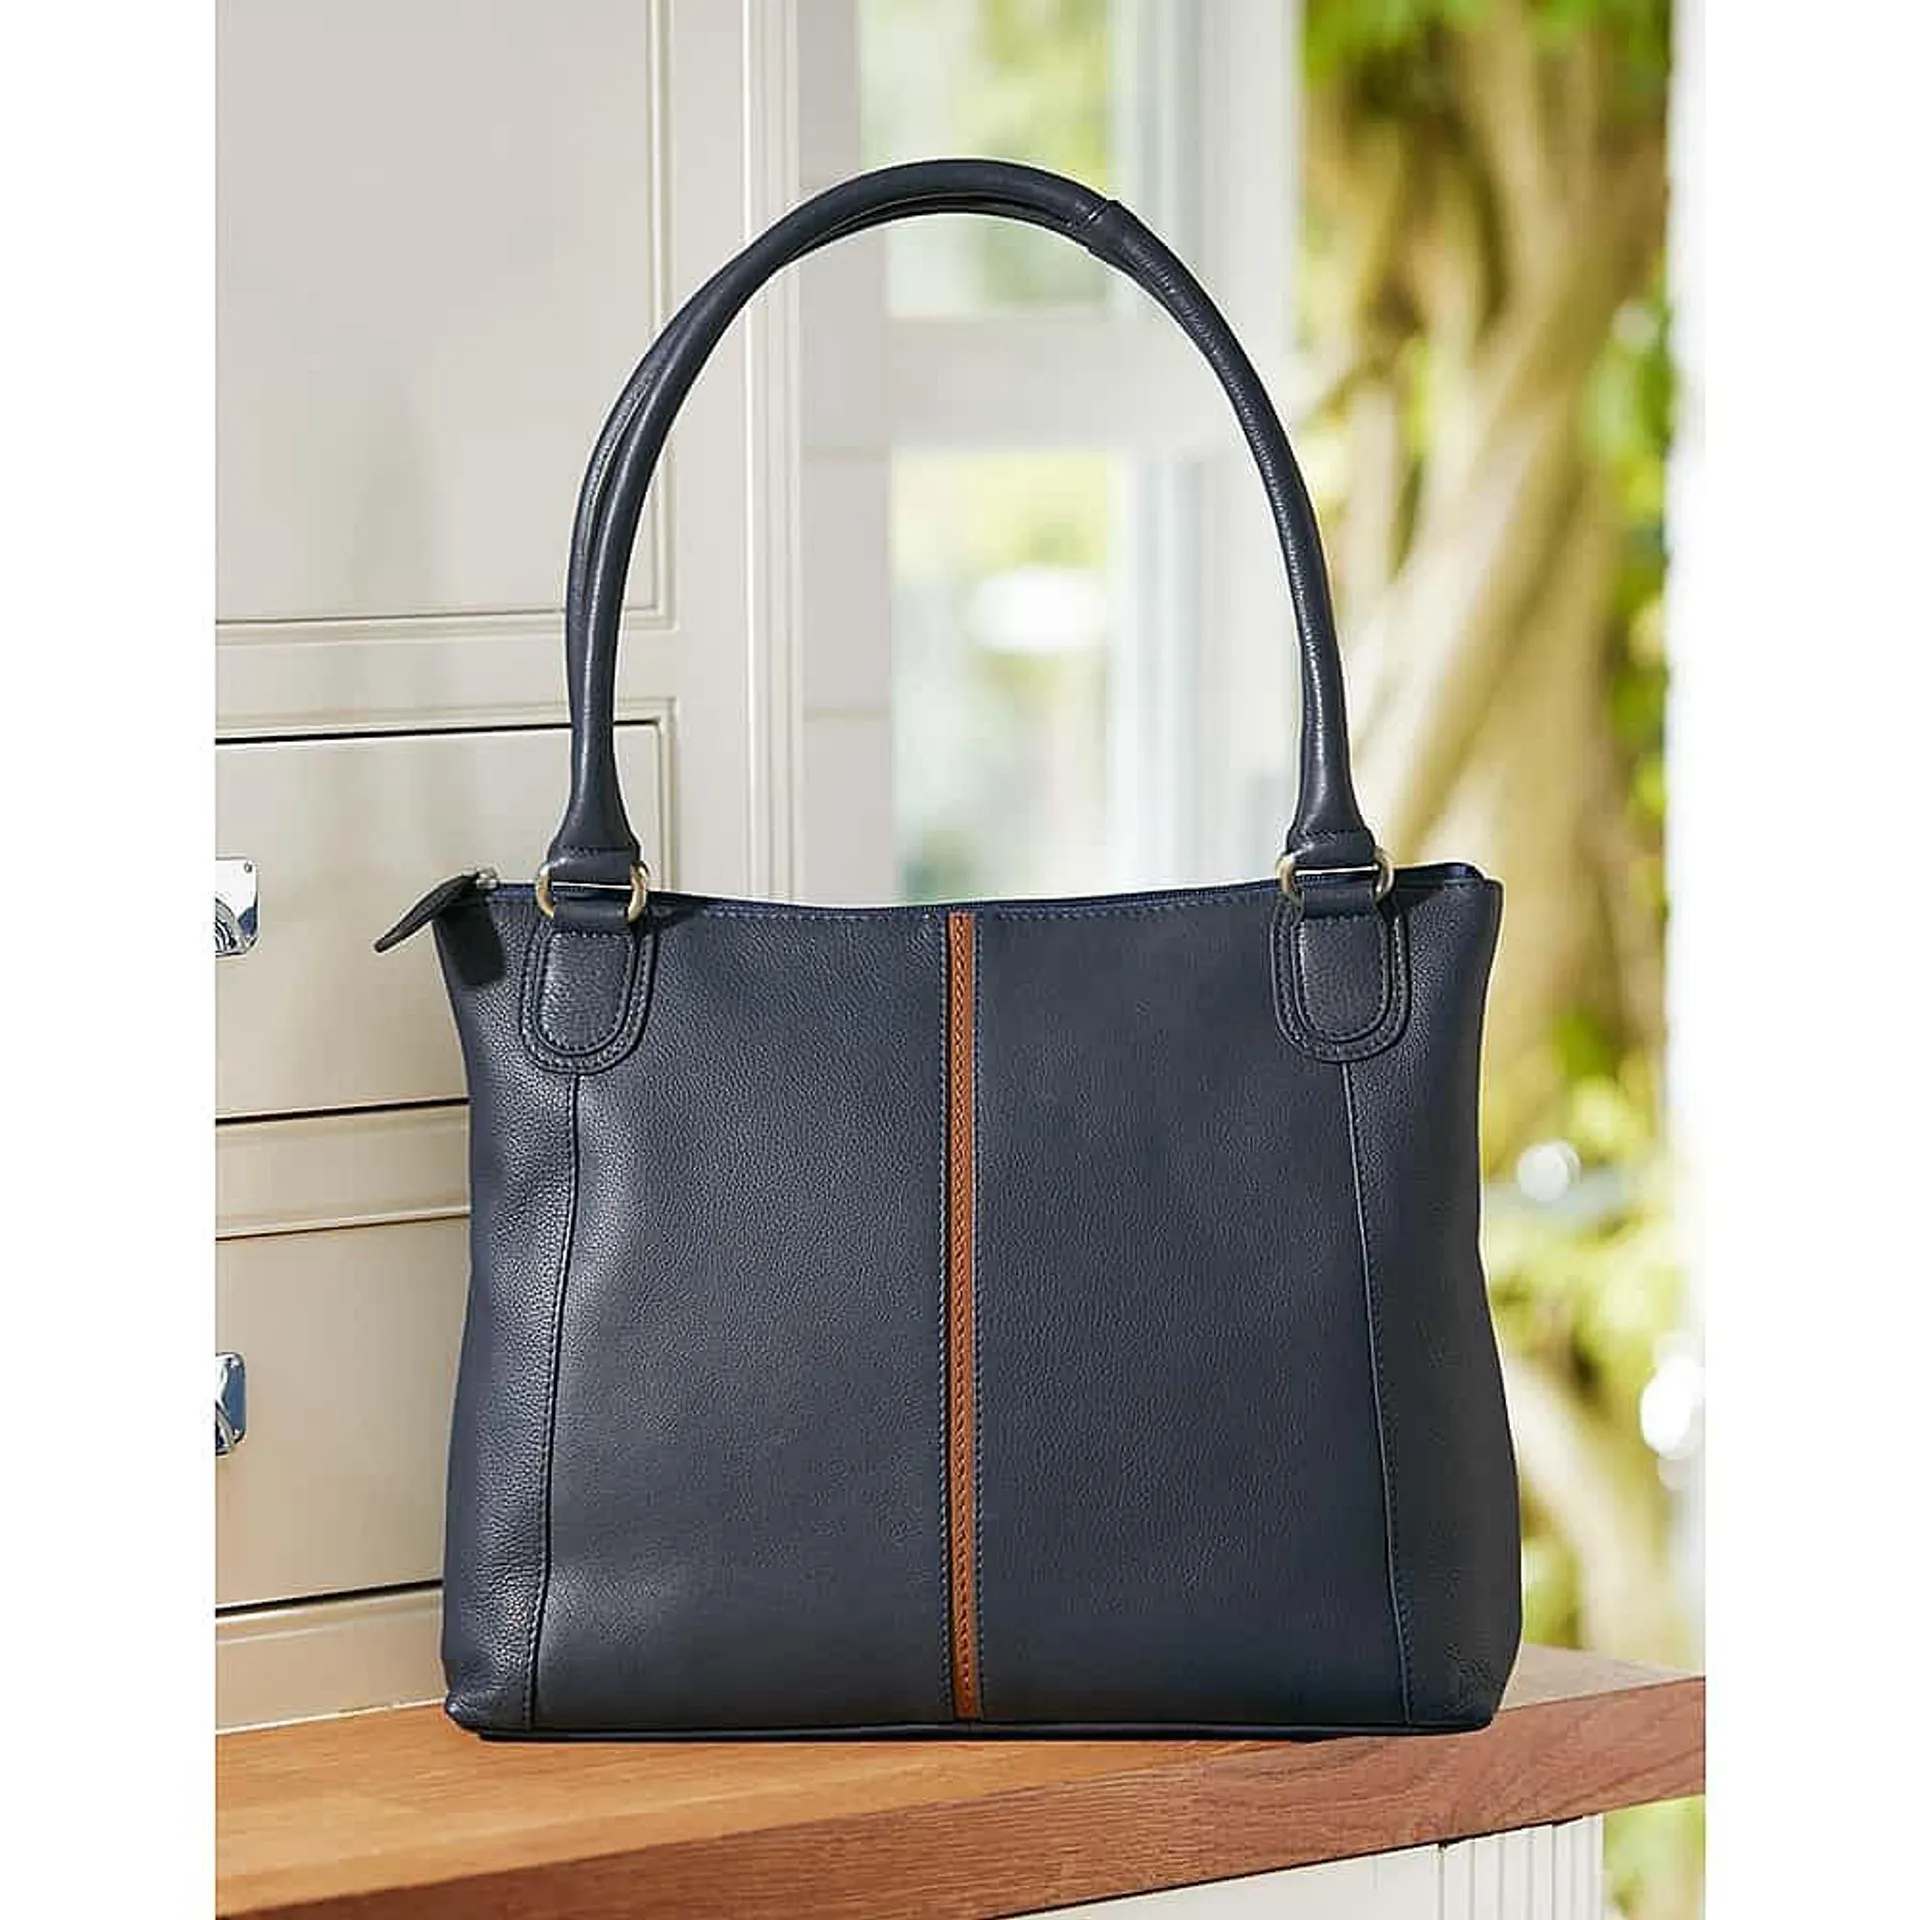 Draw the Line Leather Bag